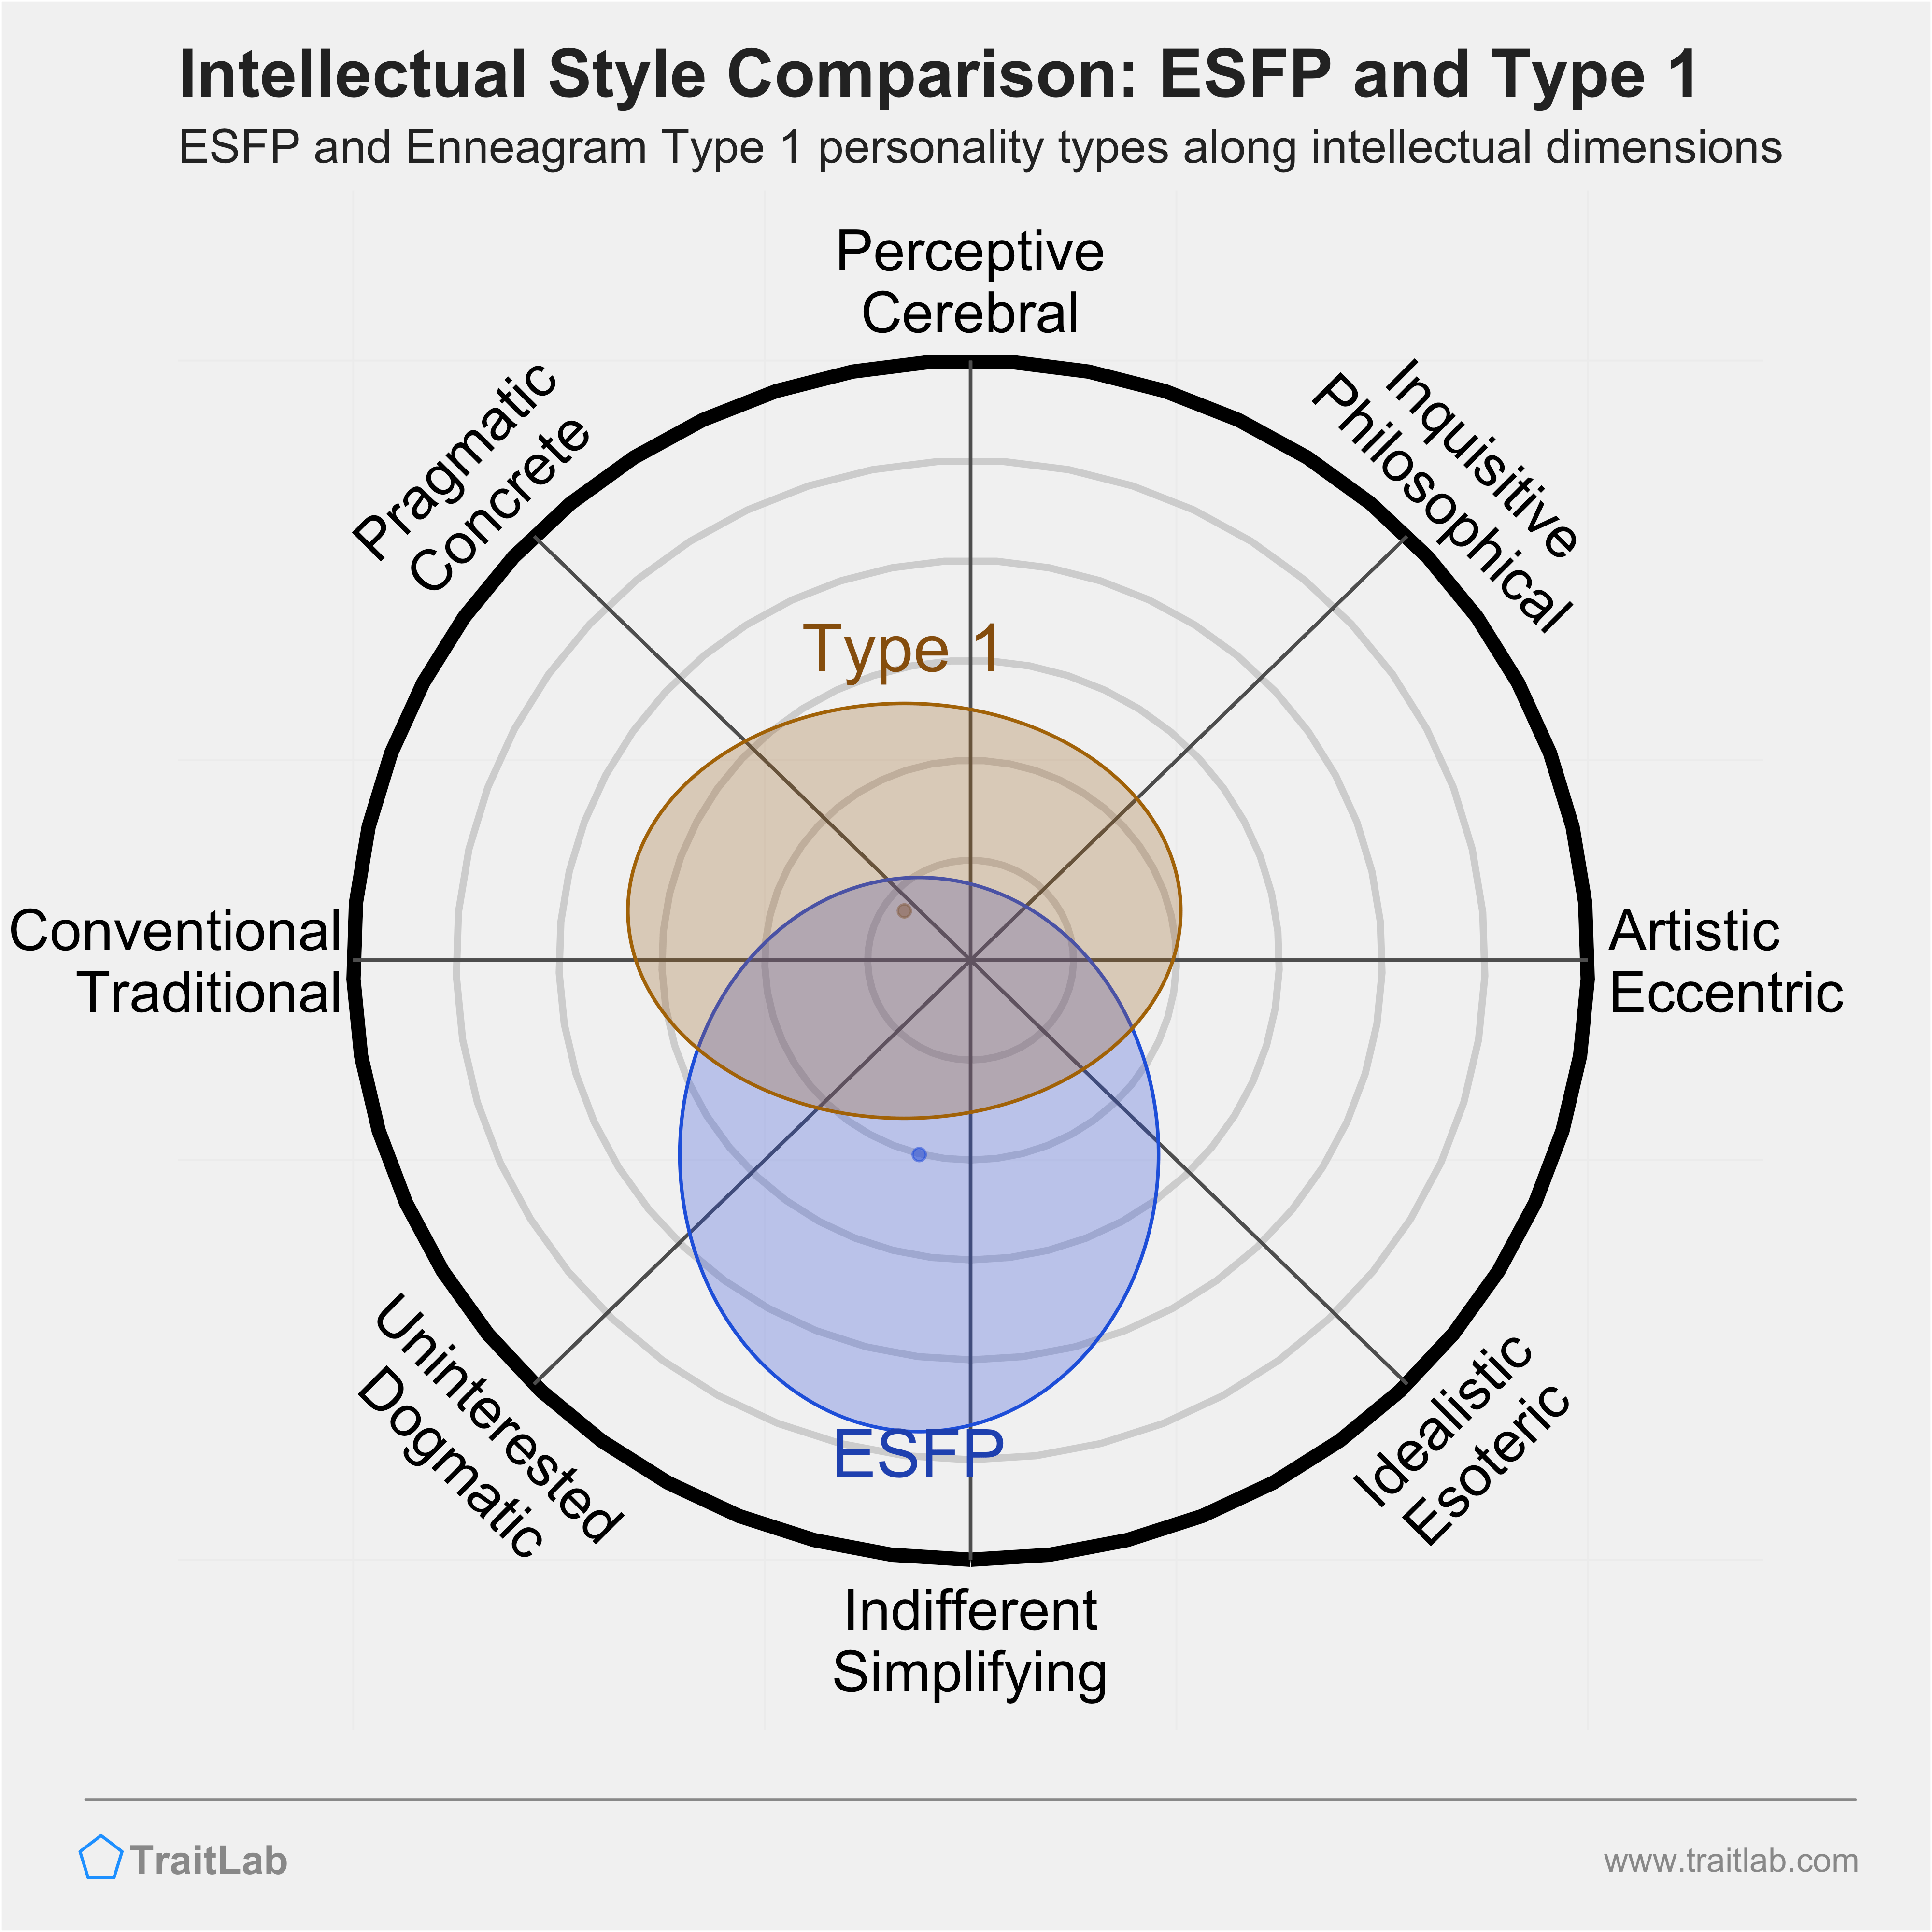 ESFP and Type 1 comparison across intellectual dimensions